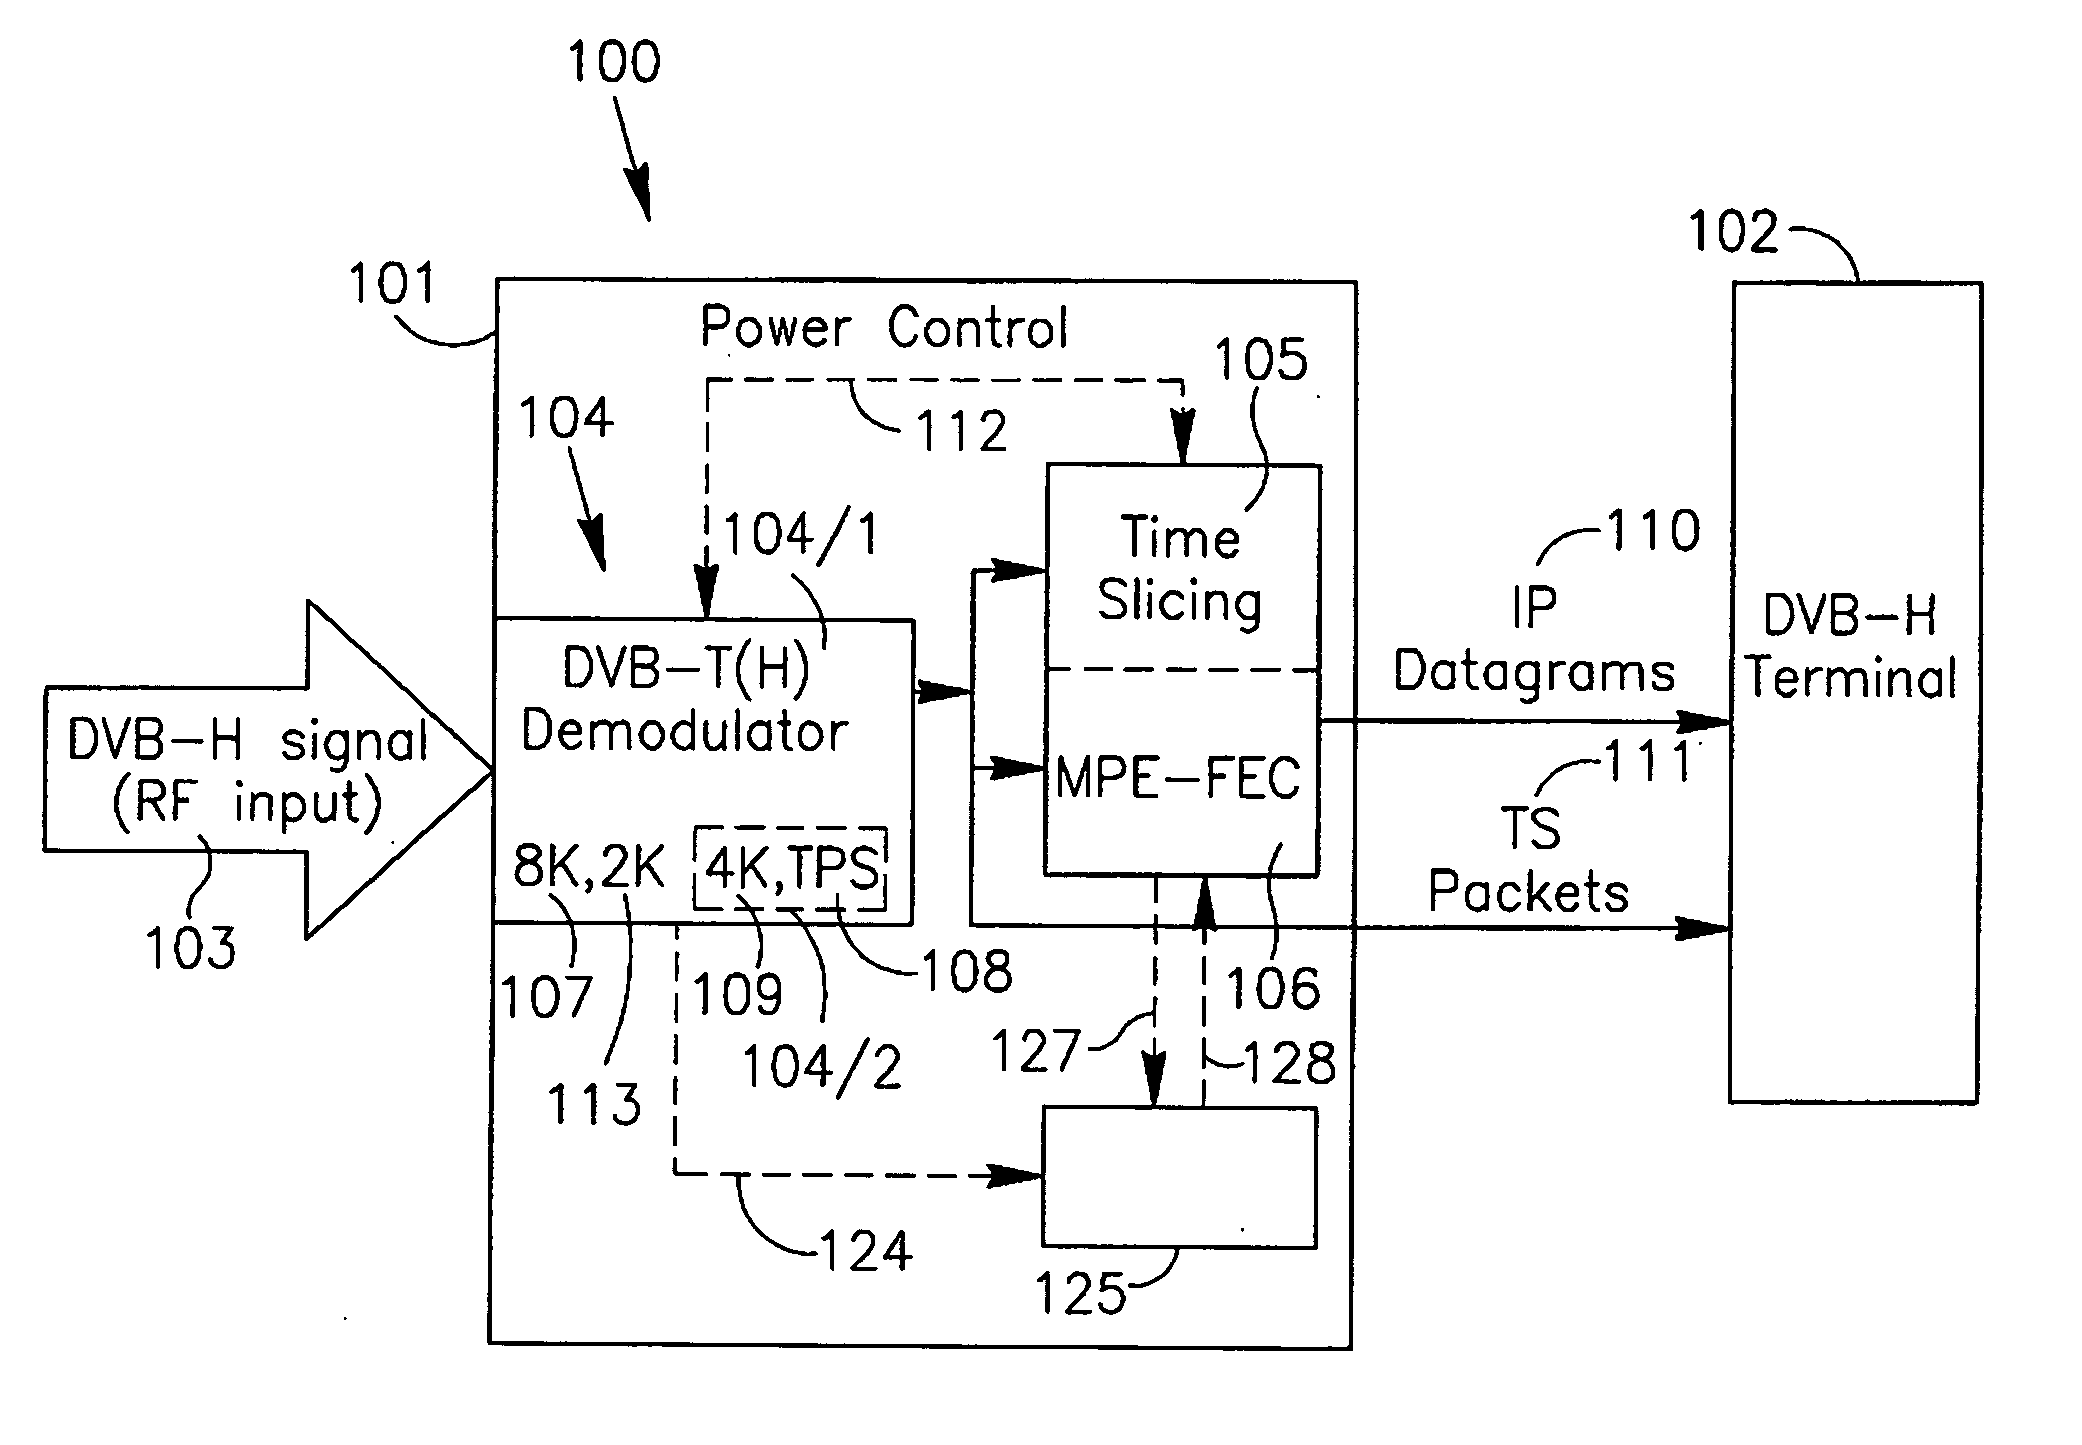 Method for efficient energy consumption in battery powered handheld and mobile devices